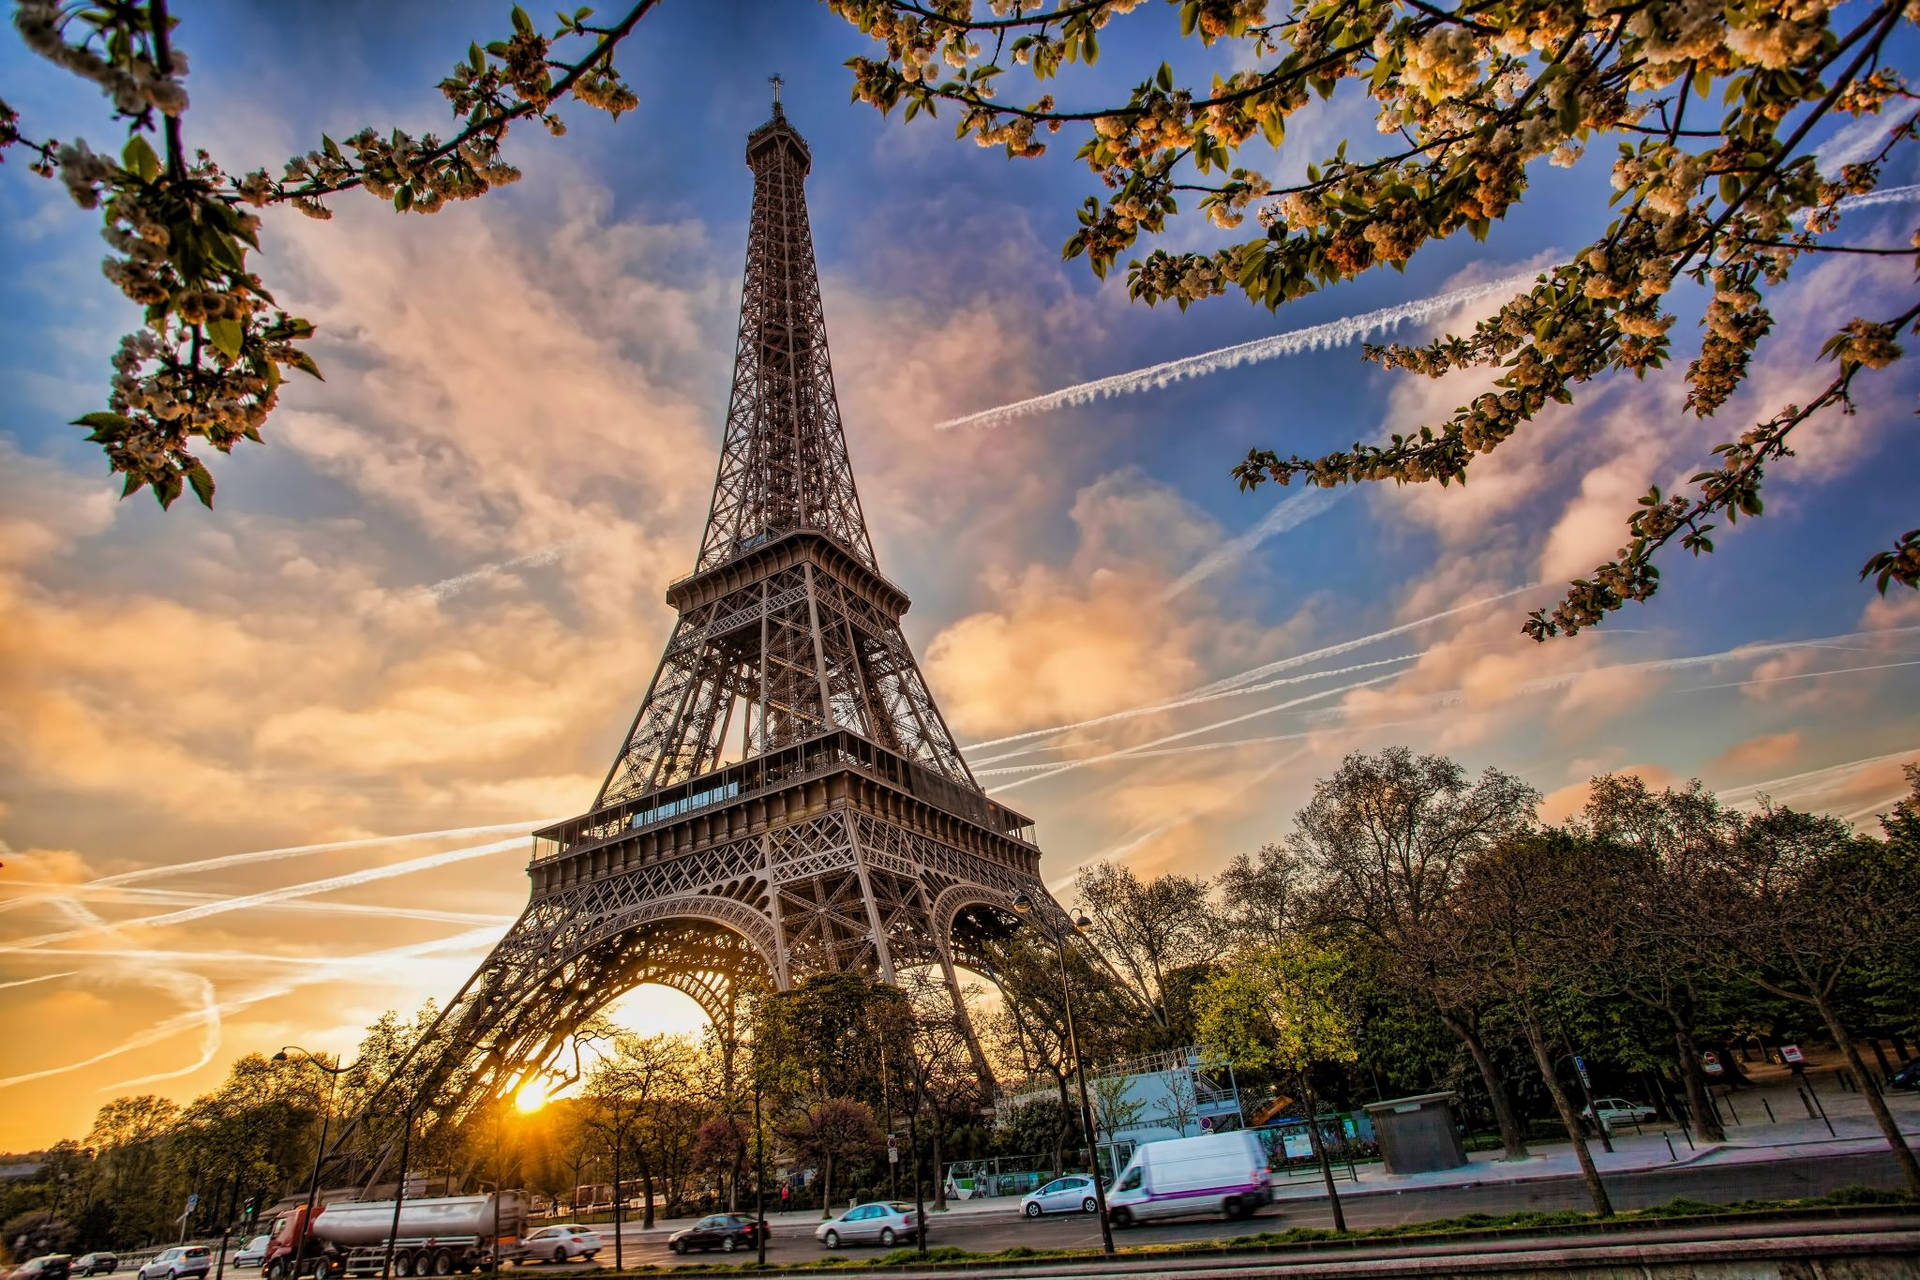 Marvel At The Beauty Of Paris During Sunrise At The Eiffel Tower Wallpaper